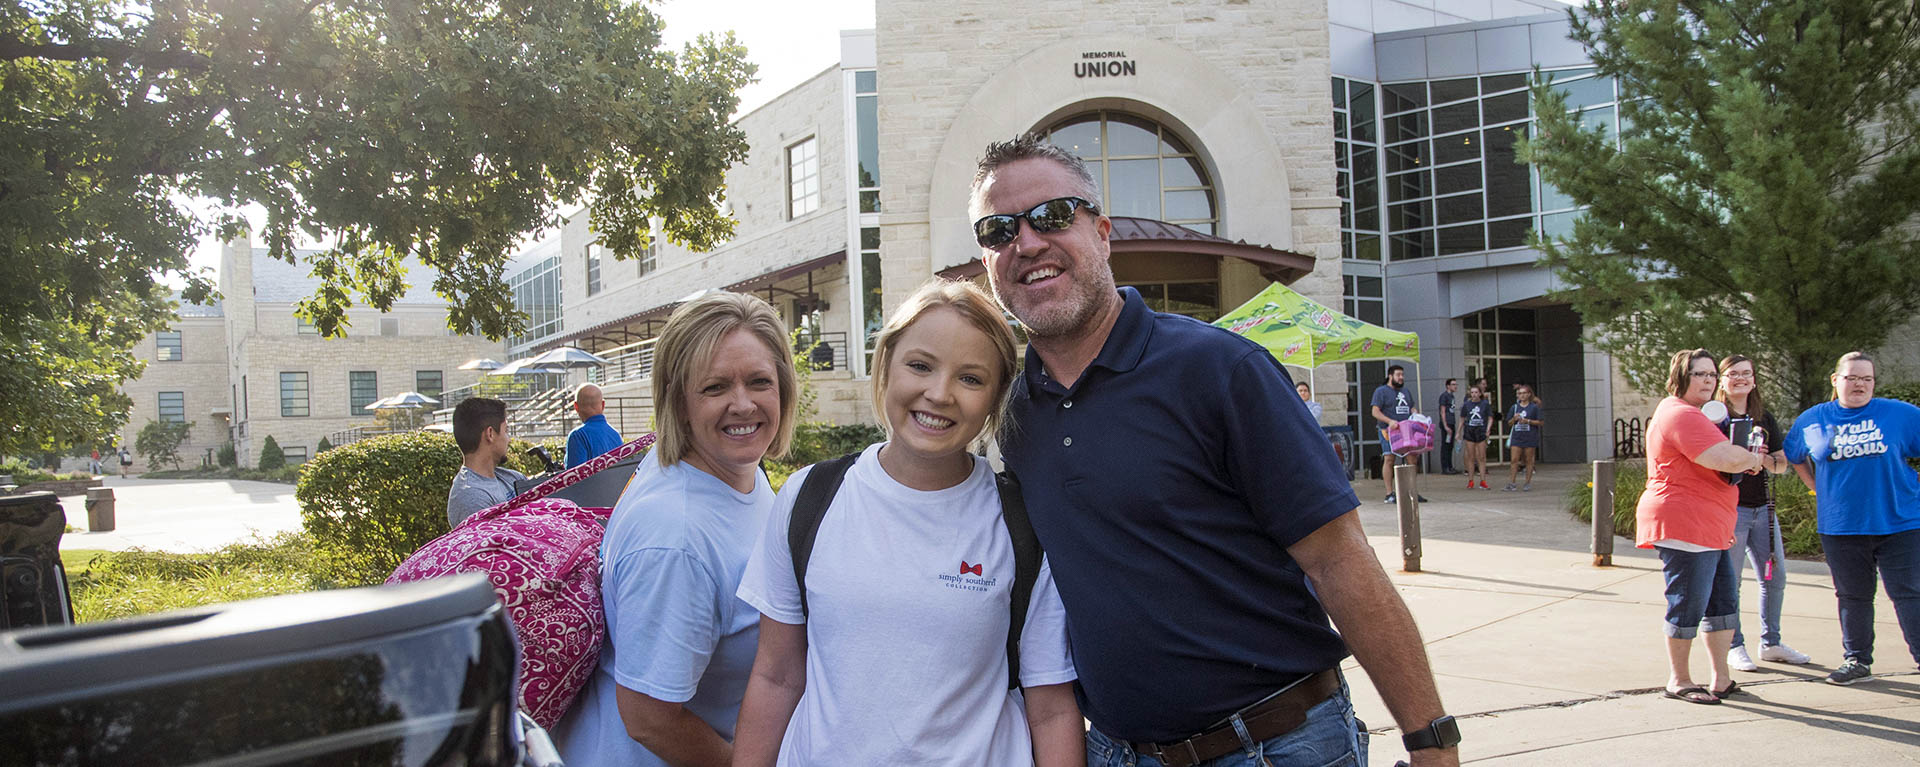 A family pose for a photo on move in day at Washburn University.